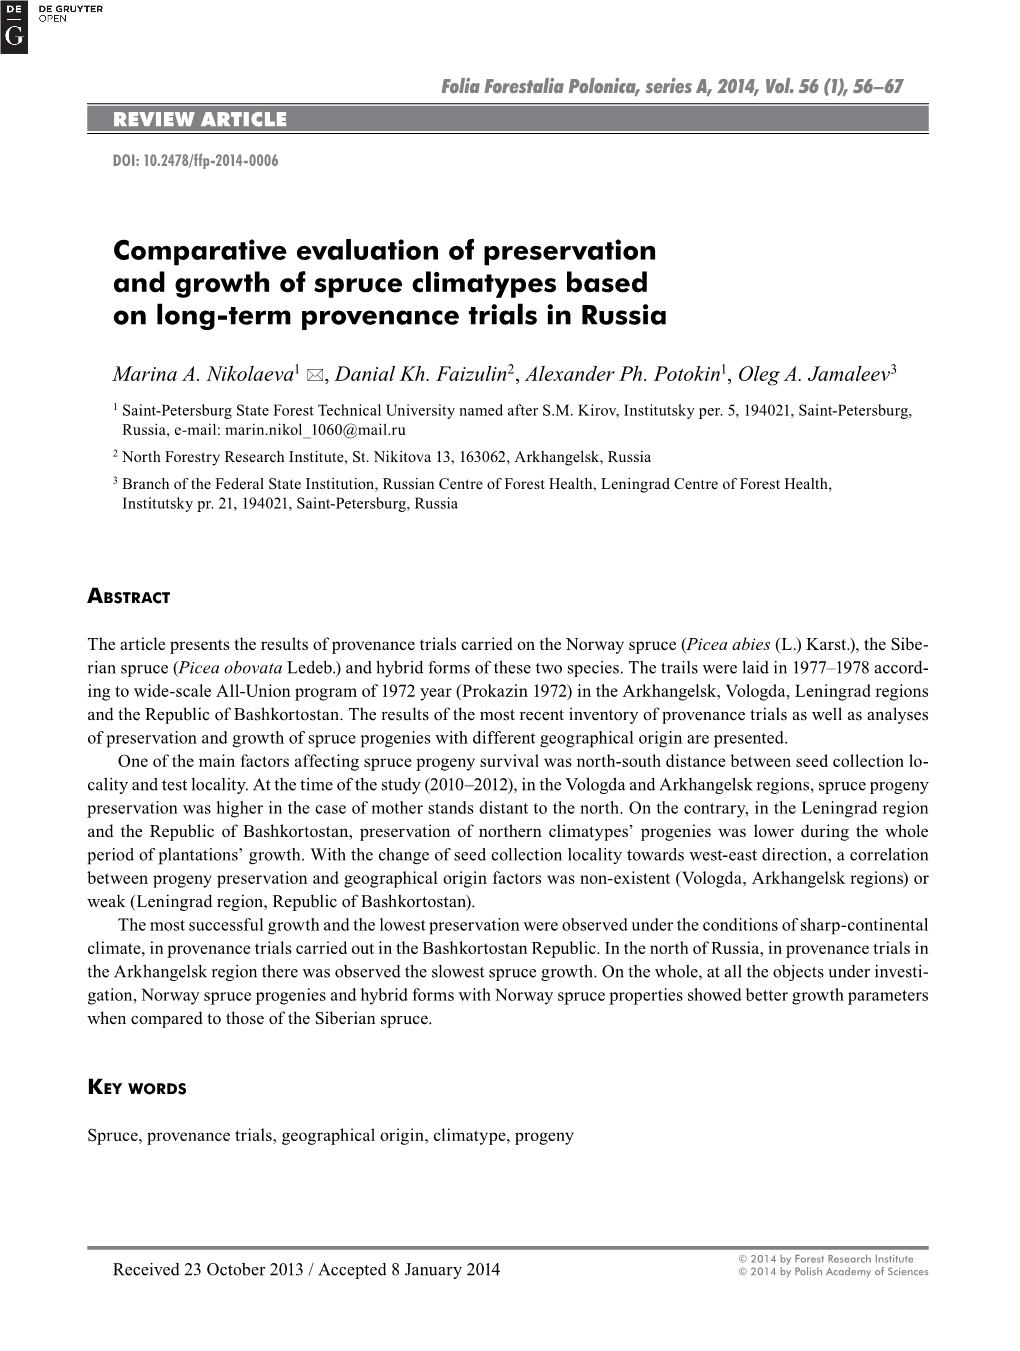 Comparative Evaluation of Preservation and Growth of Spruce Climatypes Based on Long-Term Provenance Trials in Russia